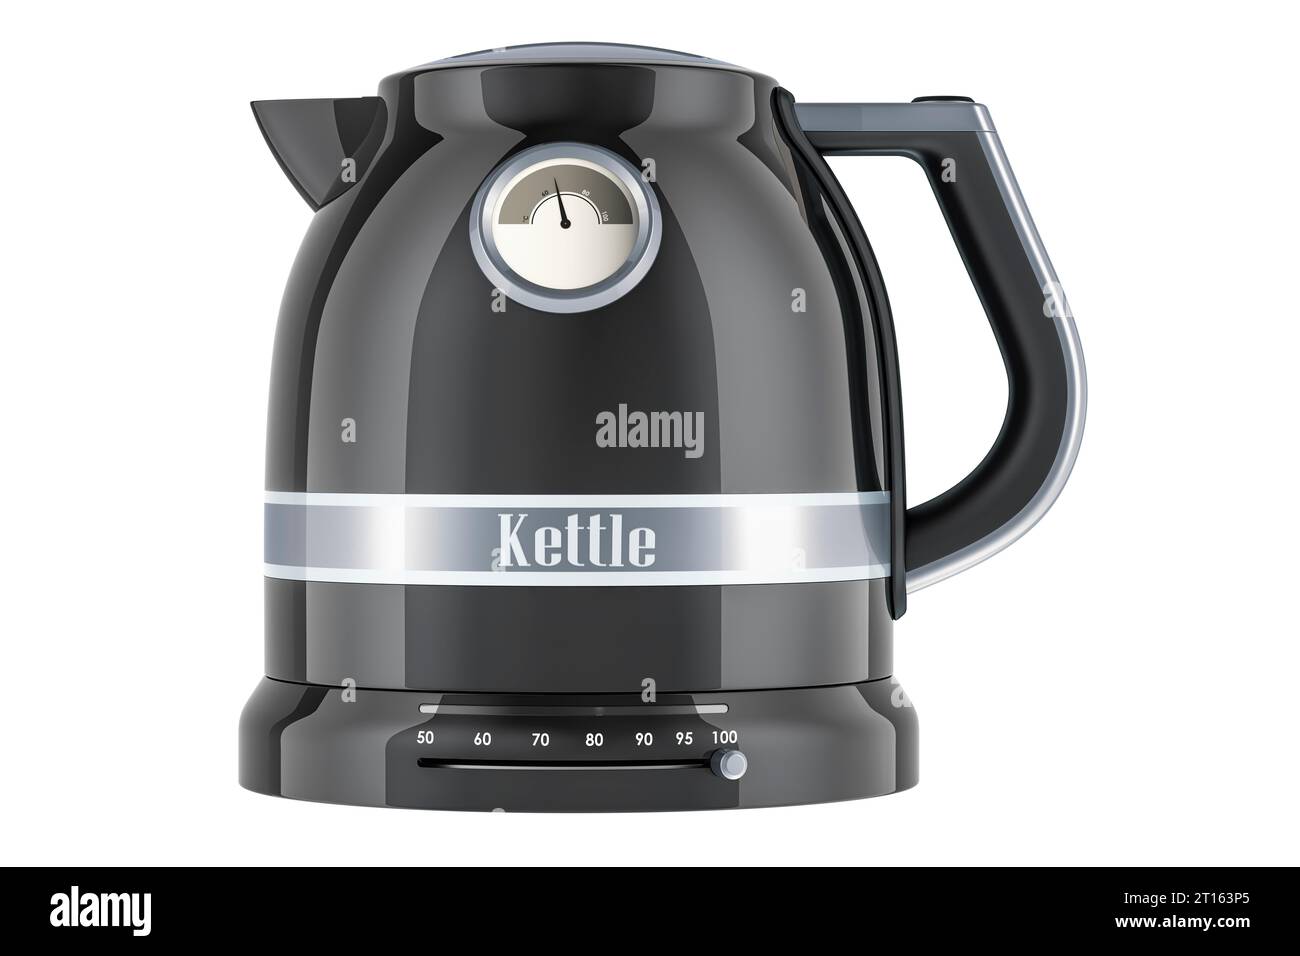 https://c8.alamy.com/comp/2T163P5/black-stainless-electric-tea-kettle-retro-design-3d-rendering-isolated-on-white-background-2T163P5.jpg